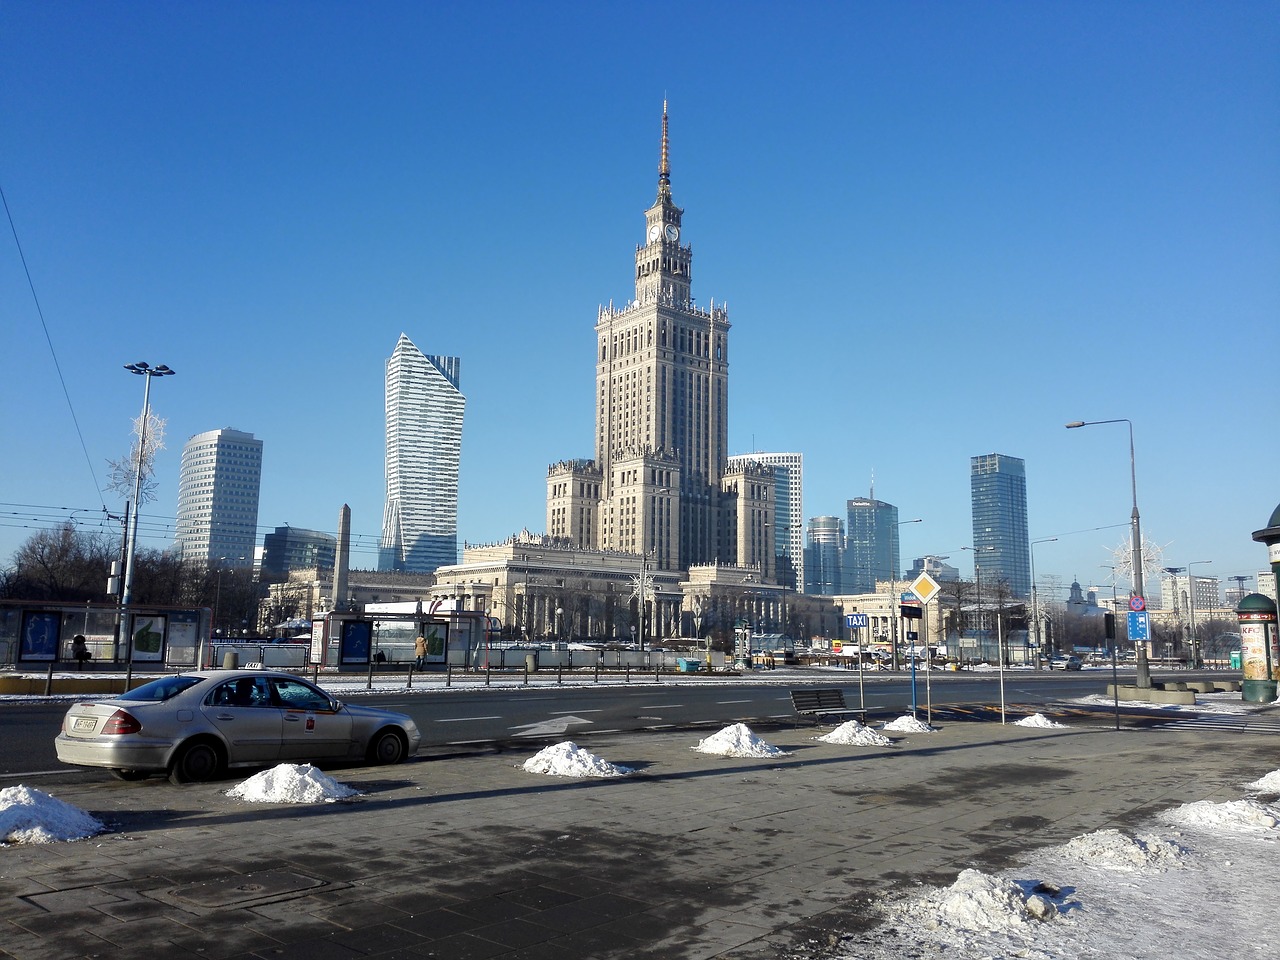 cialis warsaw palace of culture and science free photo